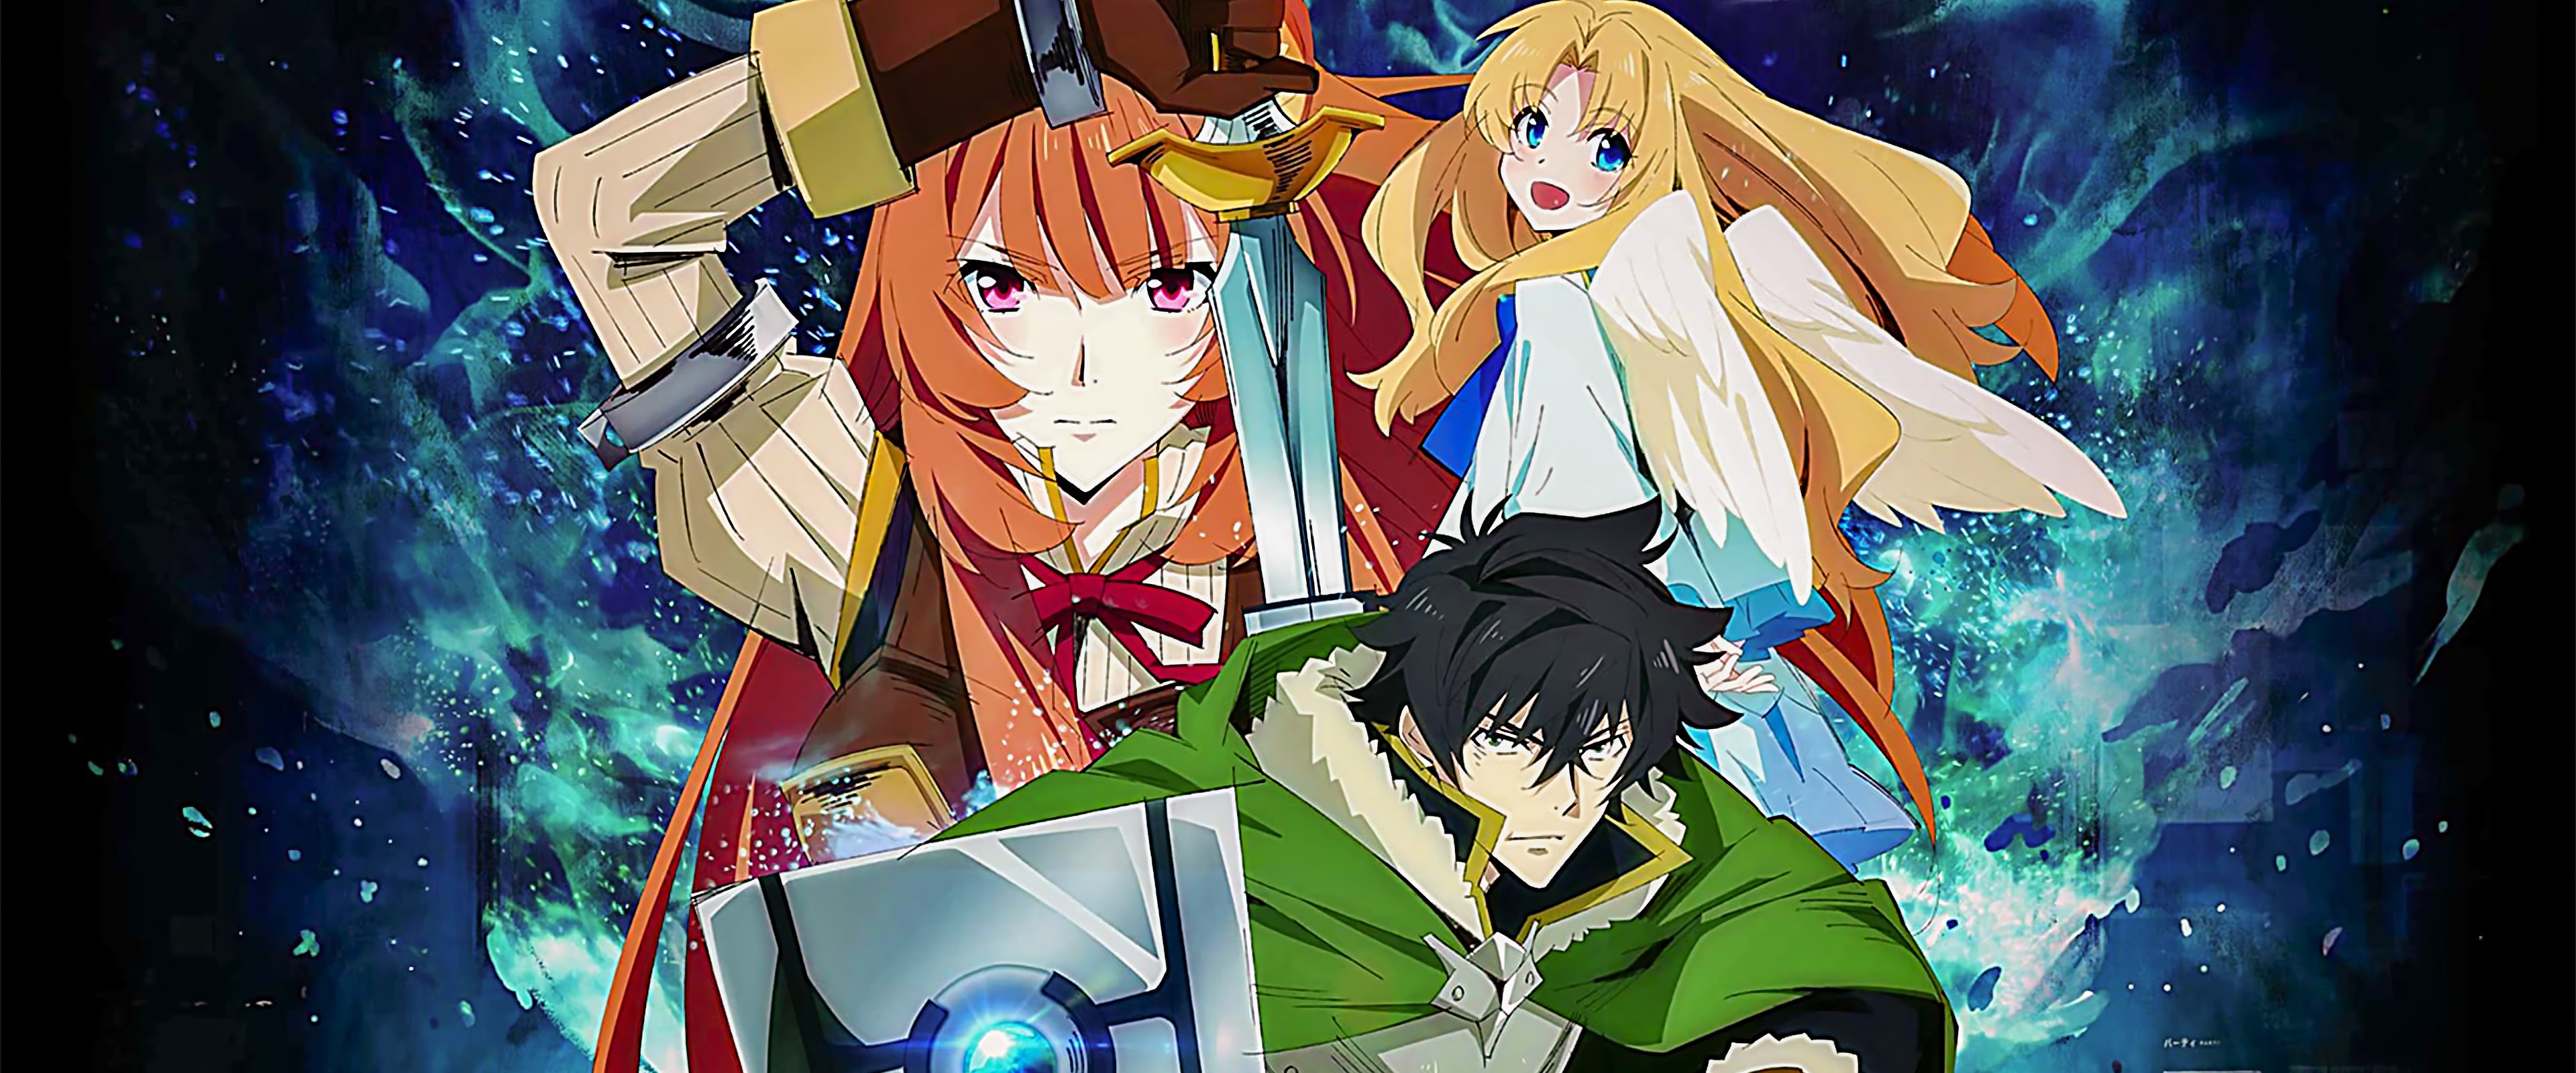 Naofumi's Strongest Shields in The Rising of the Shield Hero Ranked